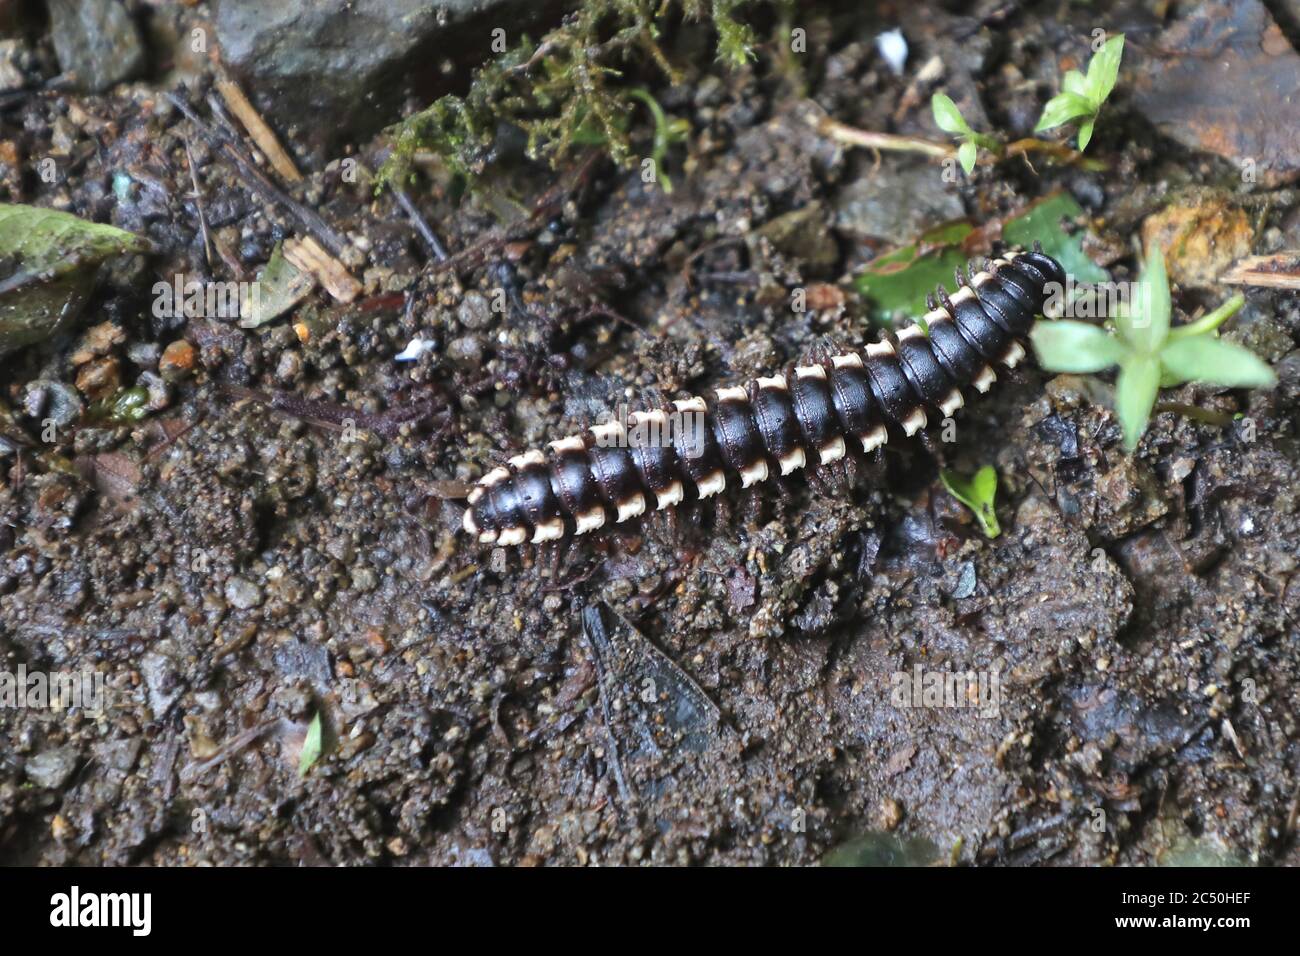 Flat-backed millipede (Barydesmus spec.), crawling over forest soil, Costa Rica, Monteverde Cloud Forest Reserve Stock Photo